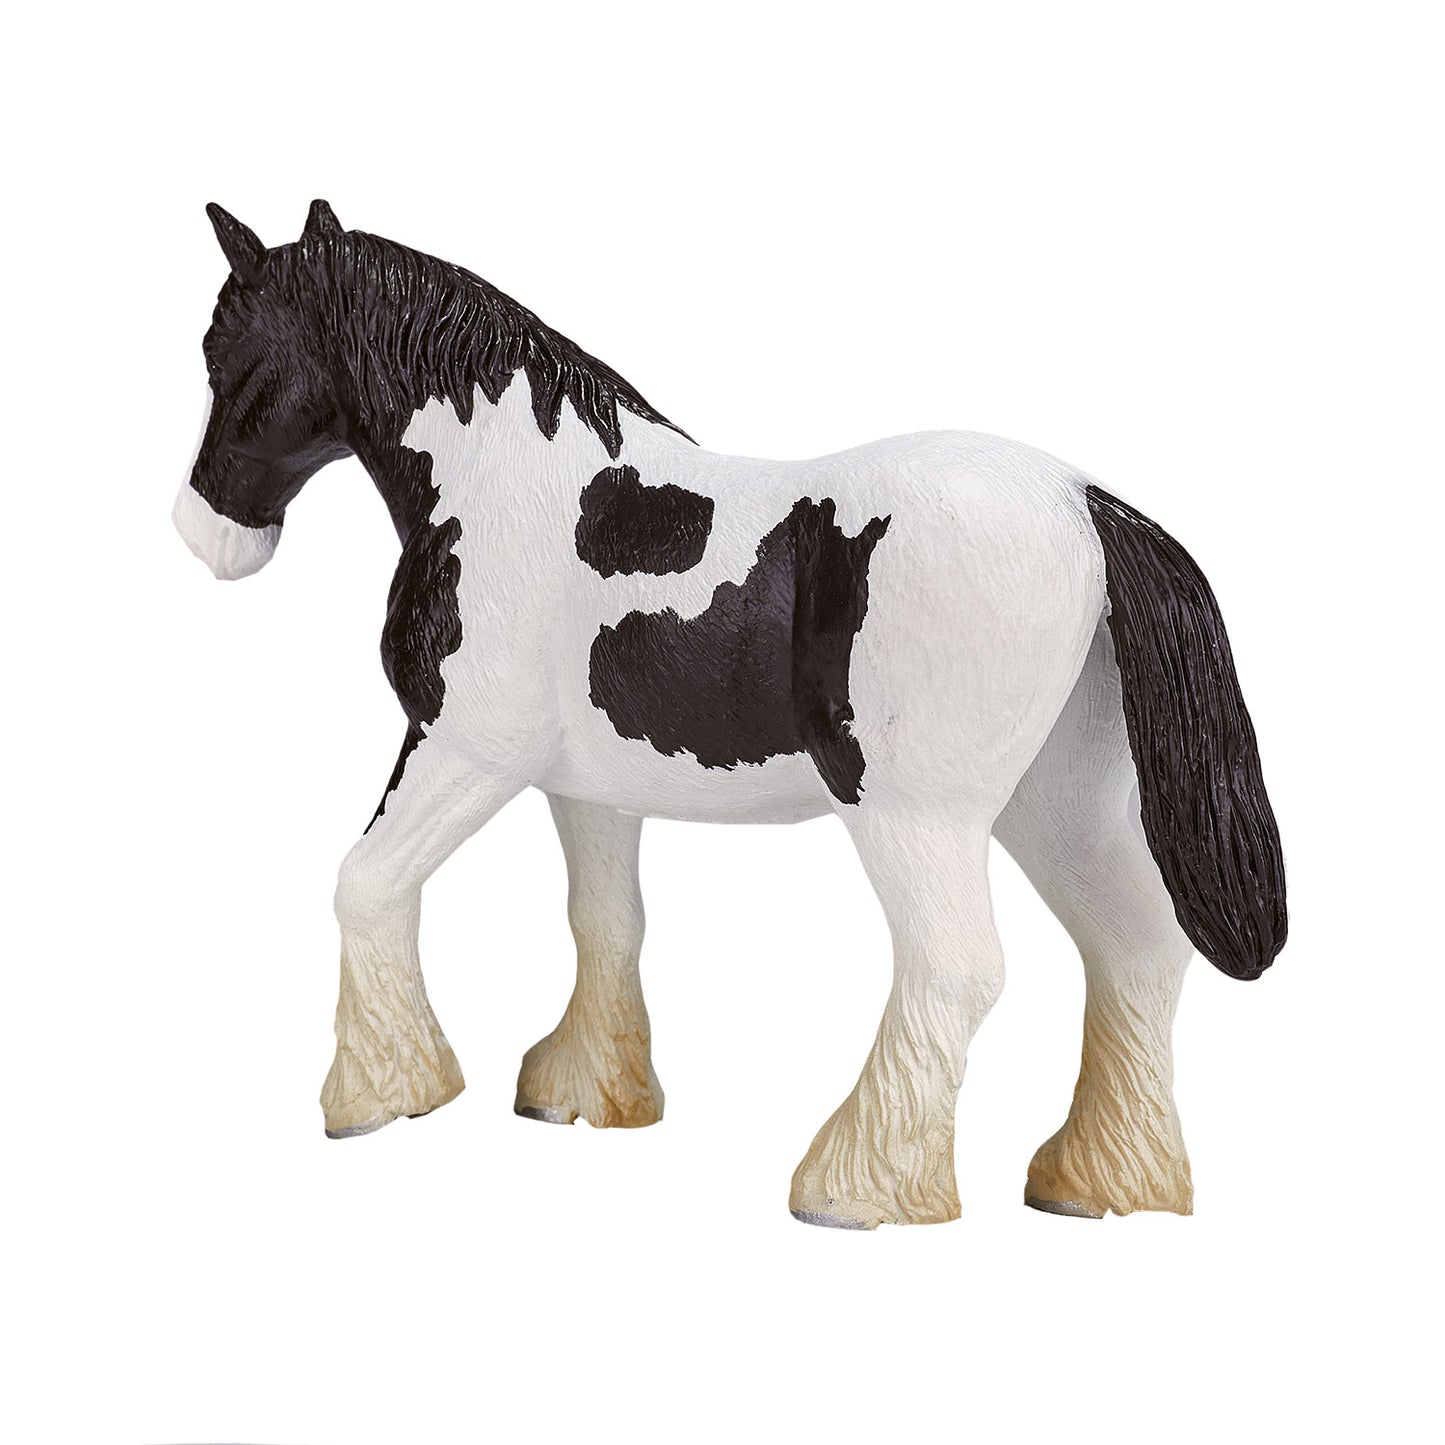 Mojo Horse World Clydesdale Horse in bianco e nero 387085